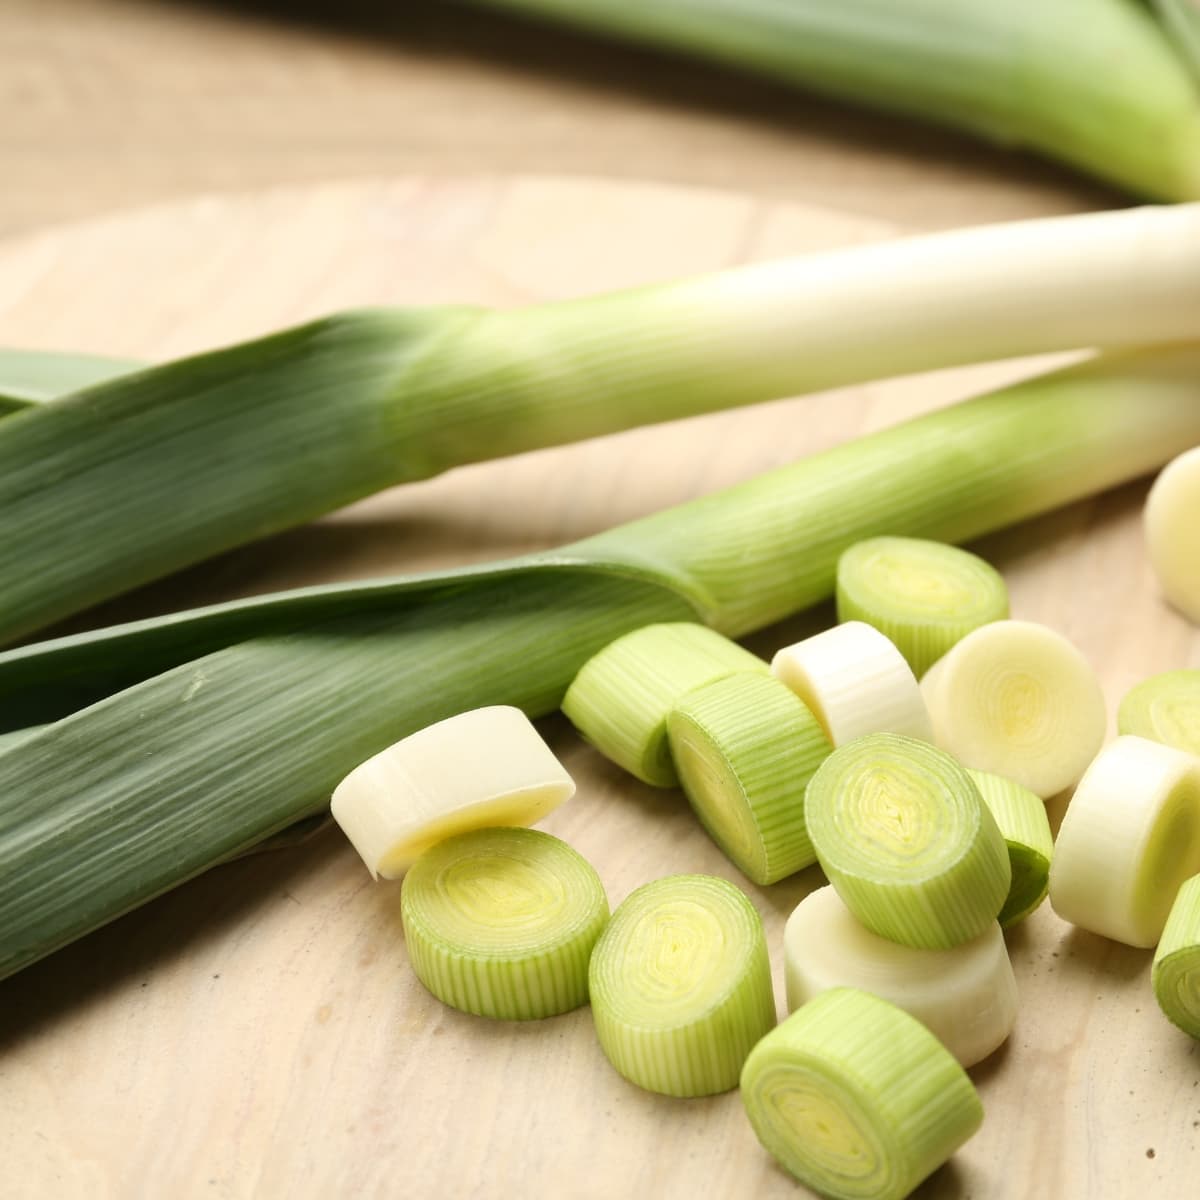 Whole And Cut Fresh Leeks On Wooden Table